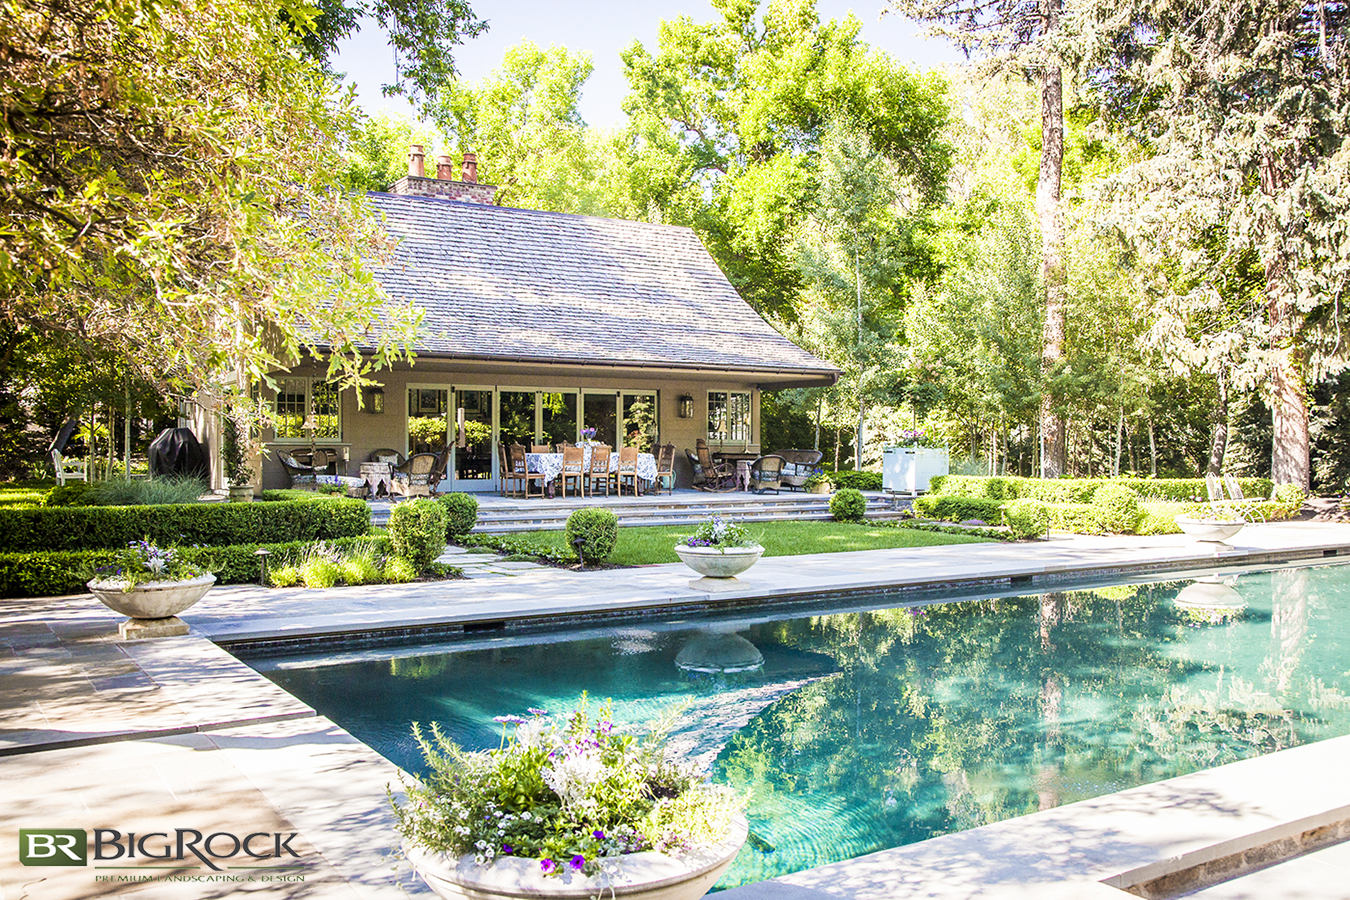 Add interest and beauty around your pool with touches of landscaping with flower pots, greenery and grasses.